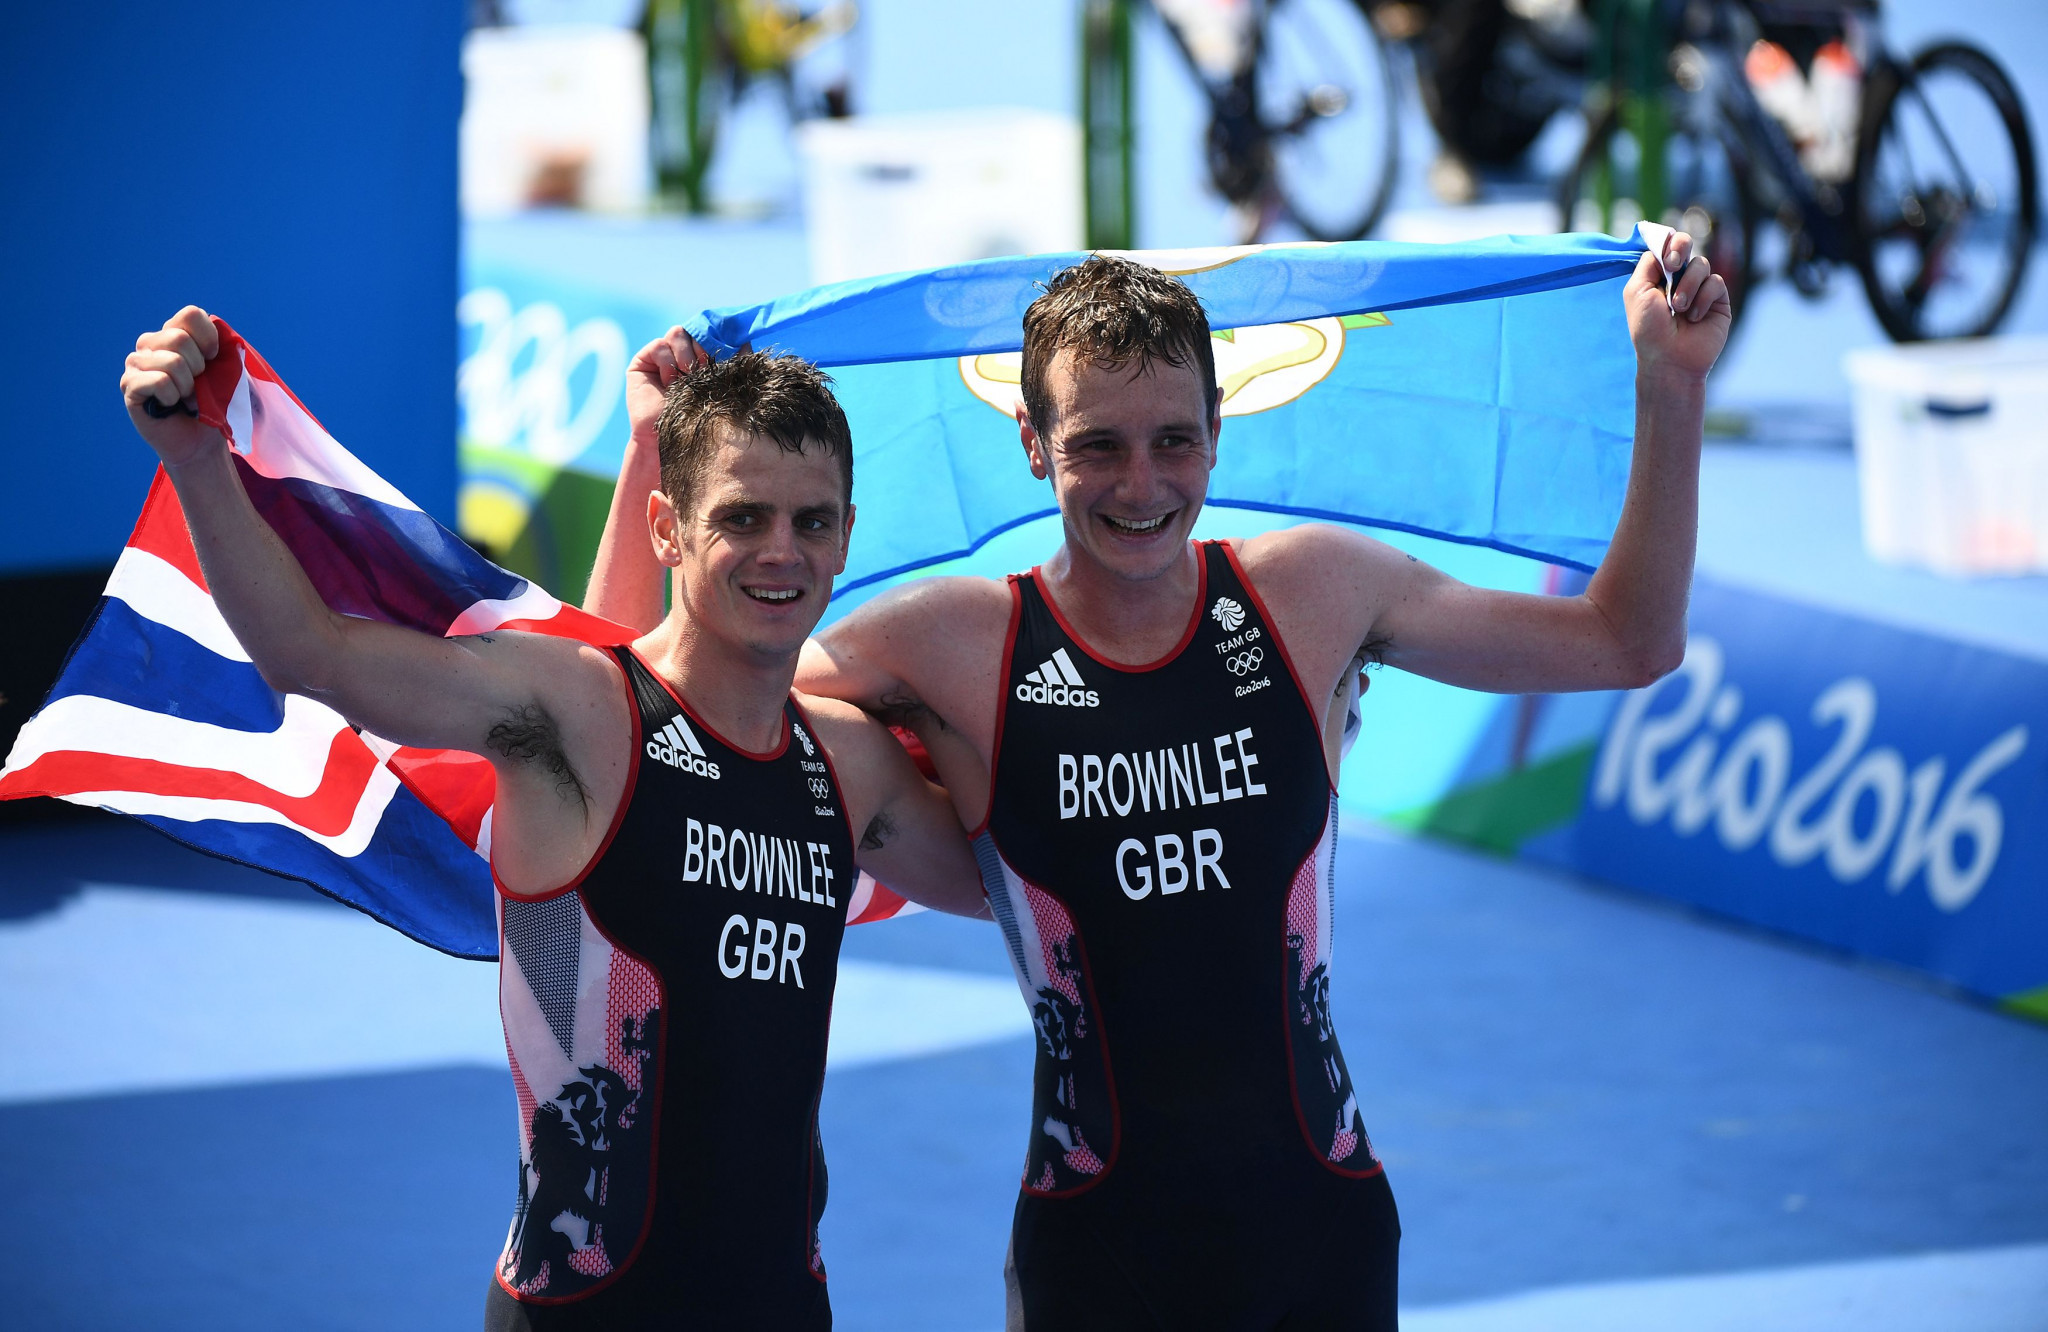 Dr Mary Hardwick has been appointed as the new Chair of British Triathlon, who have had success in recent years through the Brownlee brothers ©Getty Images